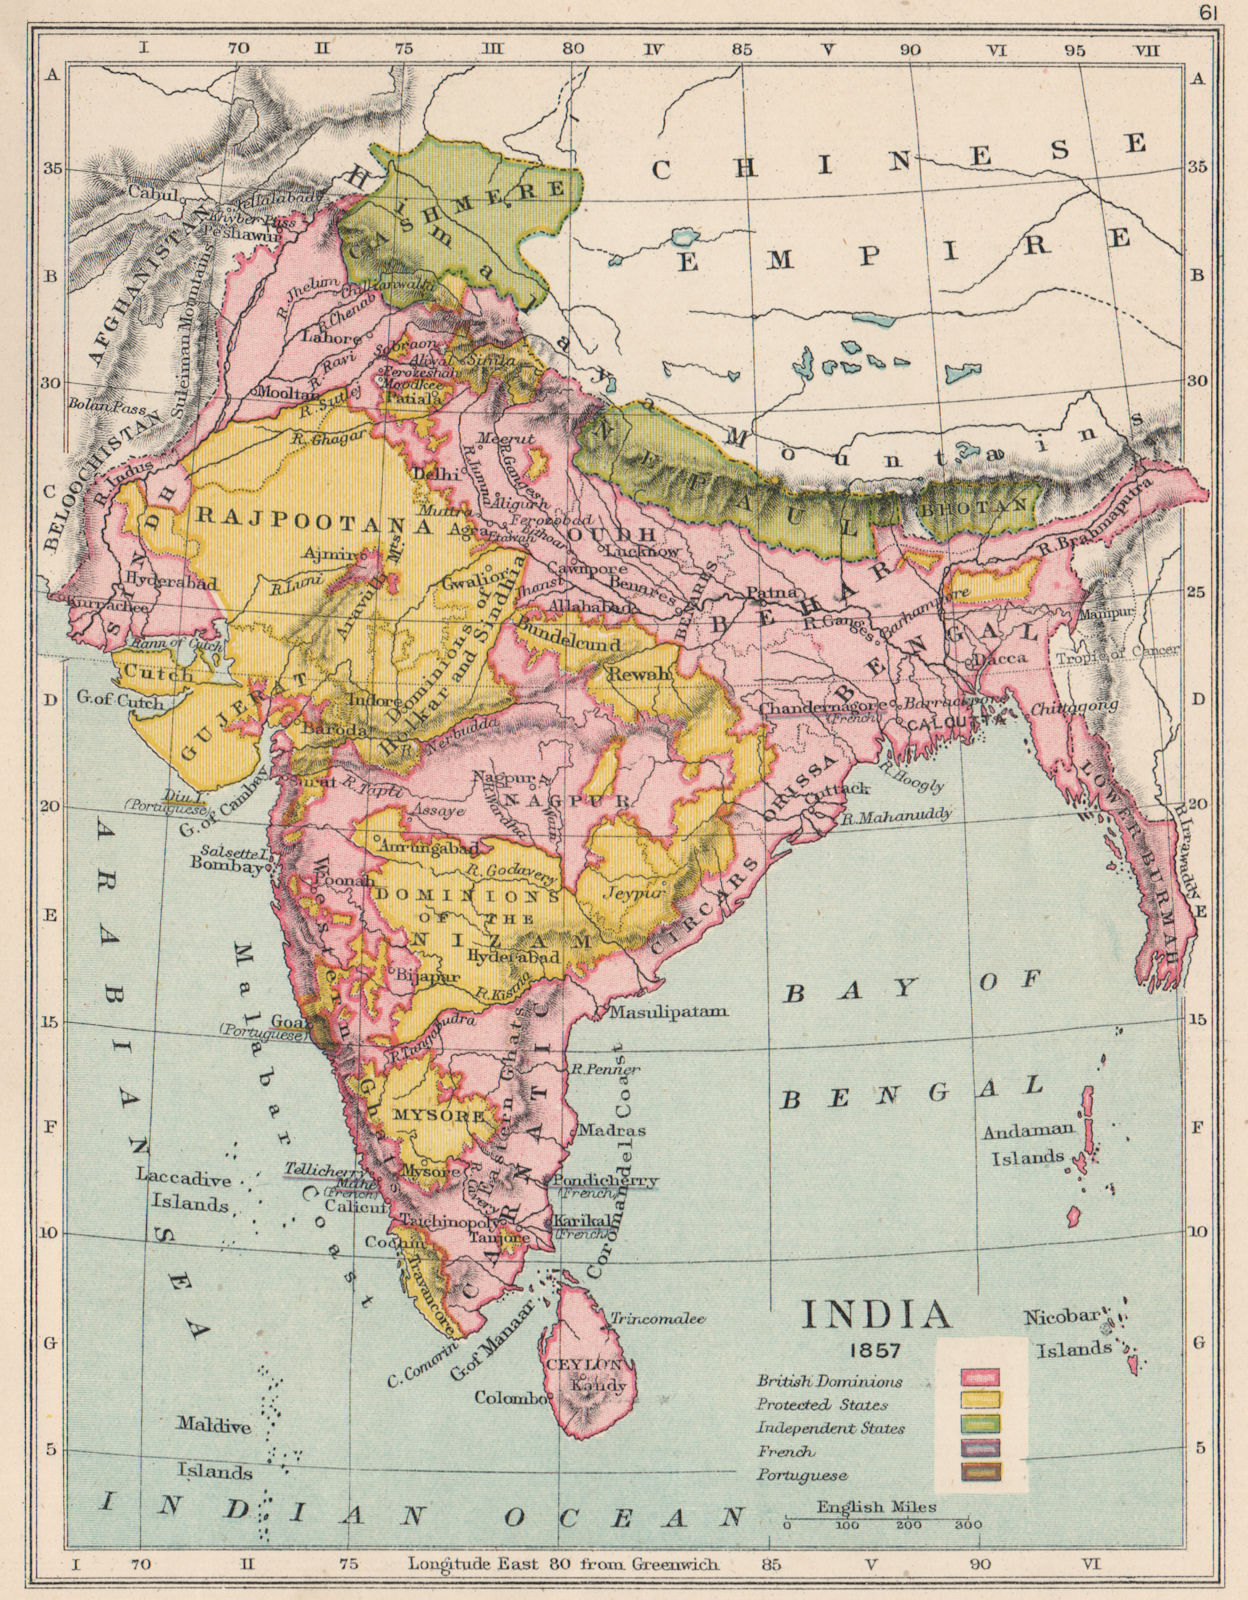 BRITISH INDIA 1857. Independent Kashmir. Protected states (yellow)  1907 map